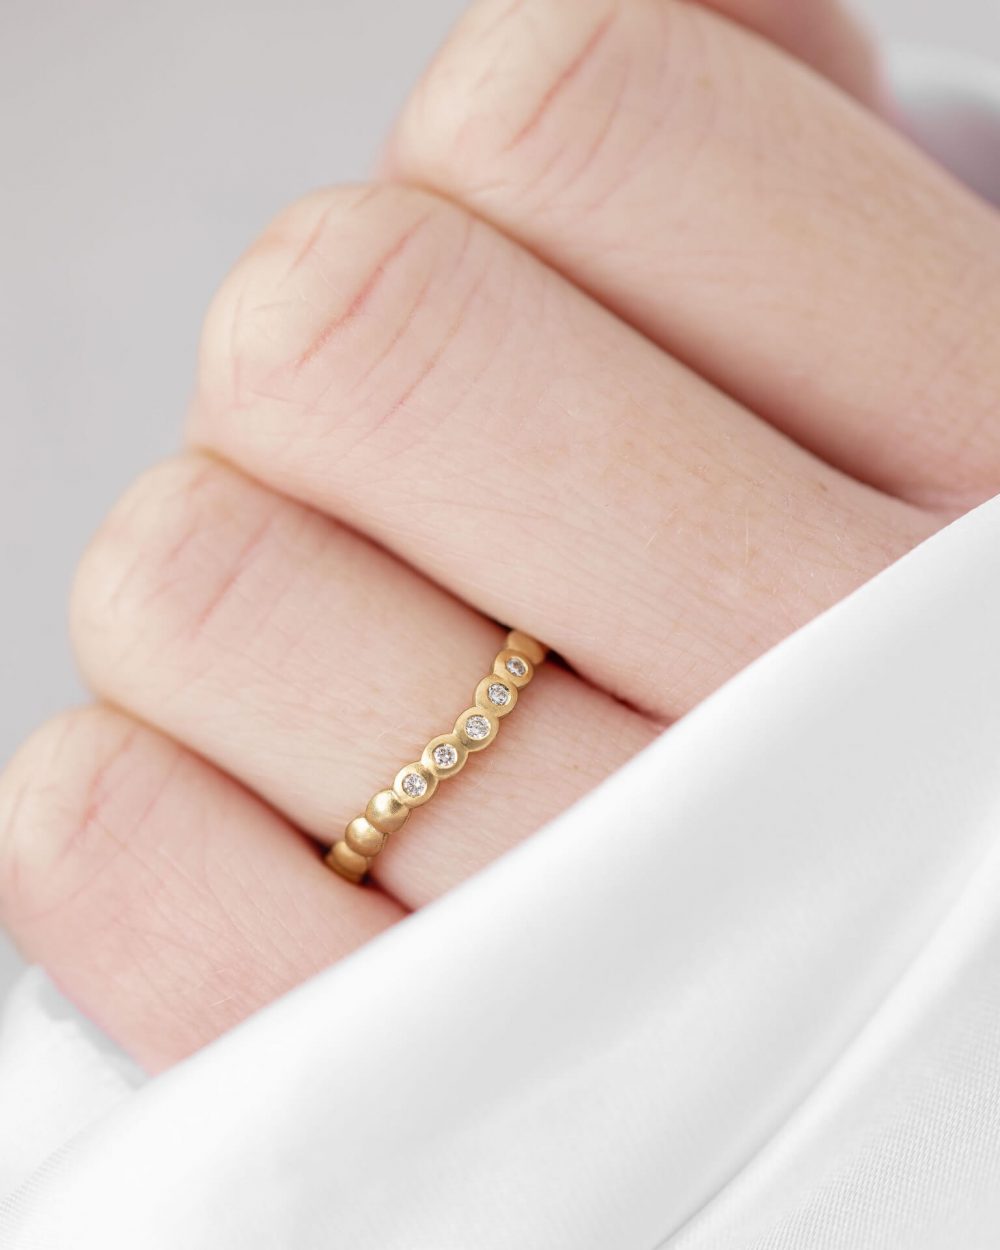 Mini Cups Curved Diamond Ring Handmade In Yellow Gold And Set With Five Sparkle Diamonds. Worn By Model (2). Handmade By Bristol Jeweller Jacks Turner.